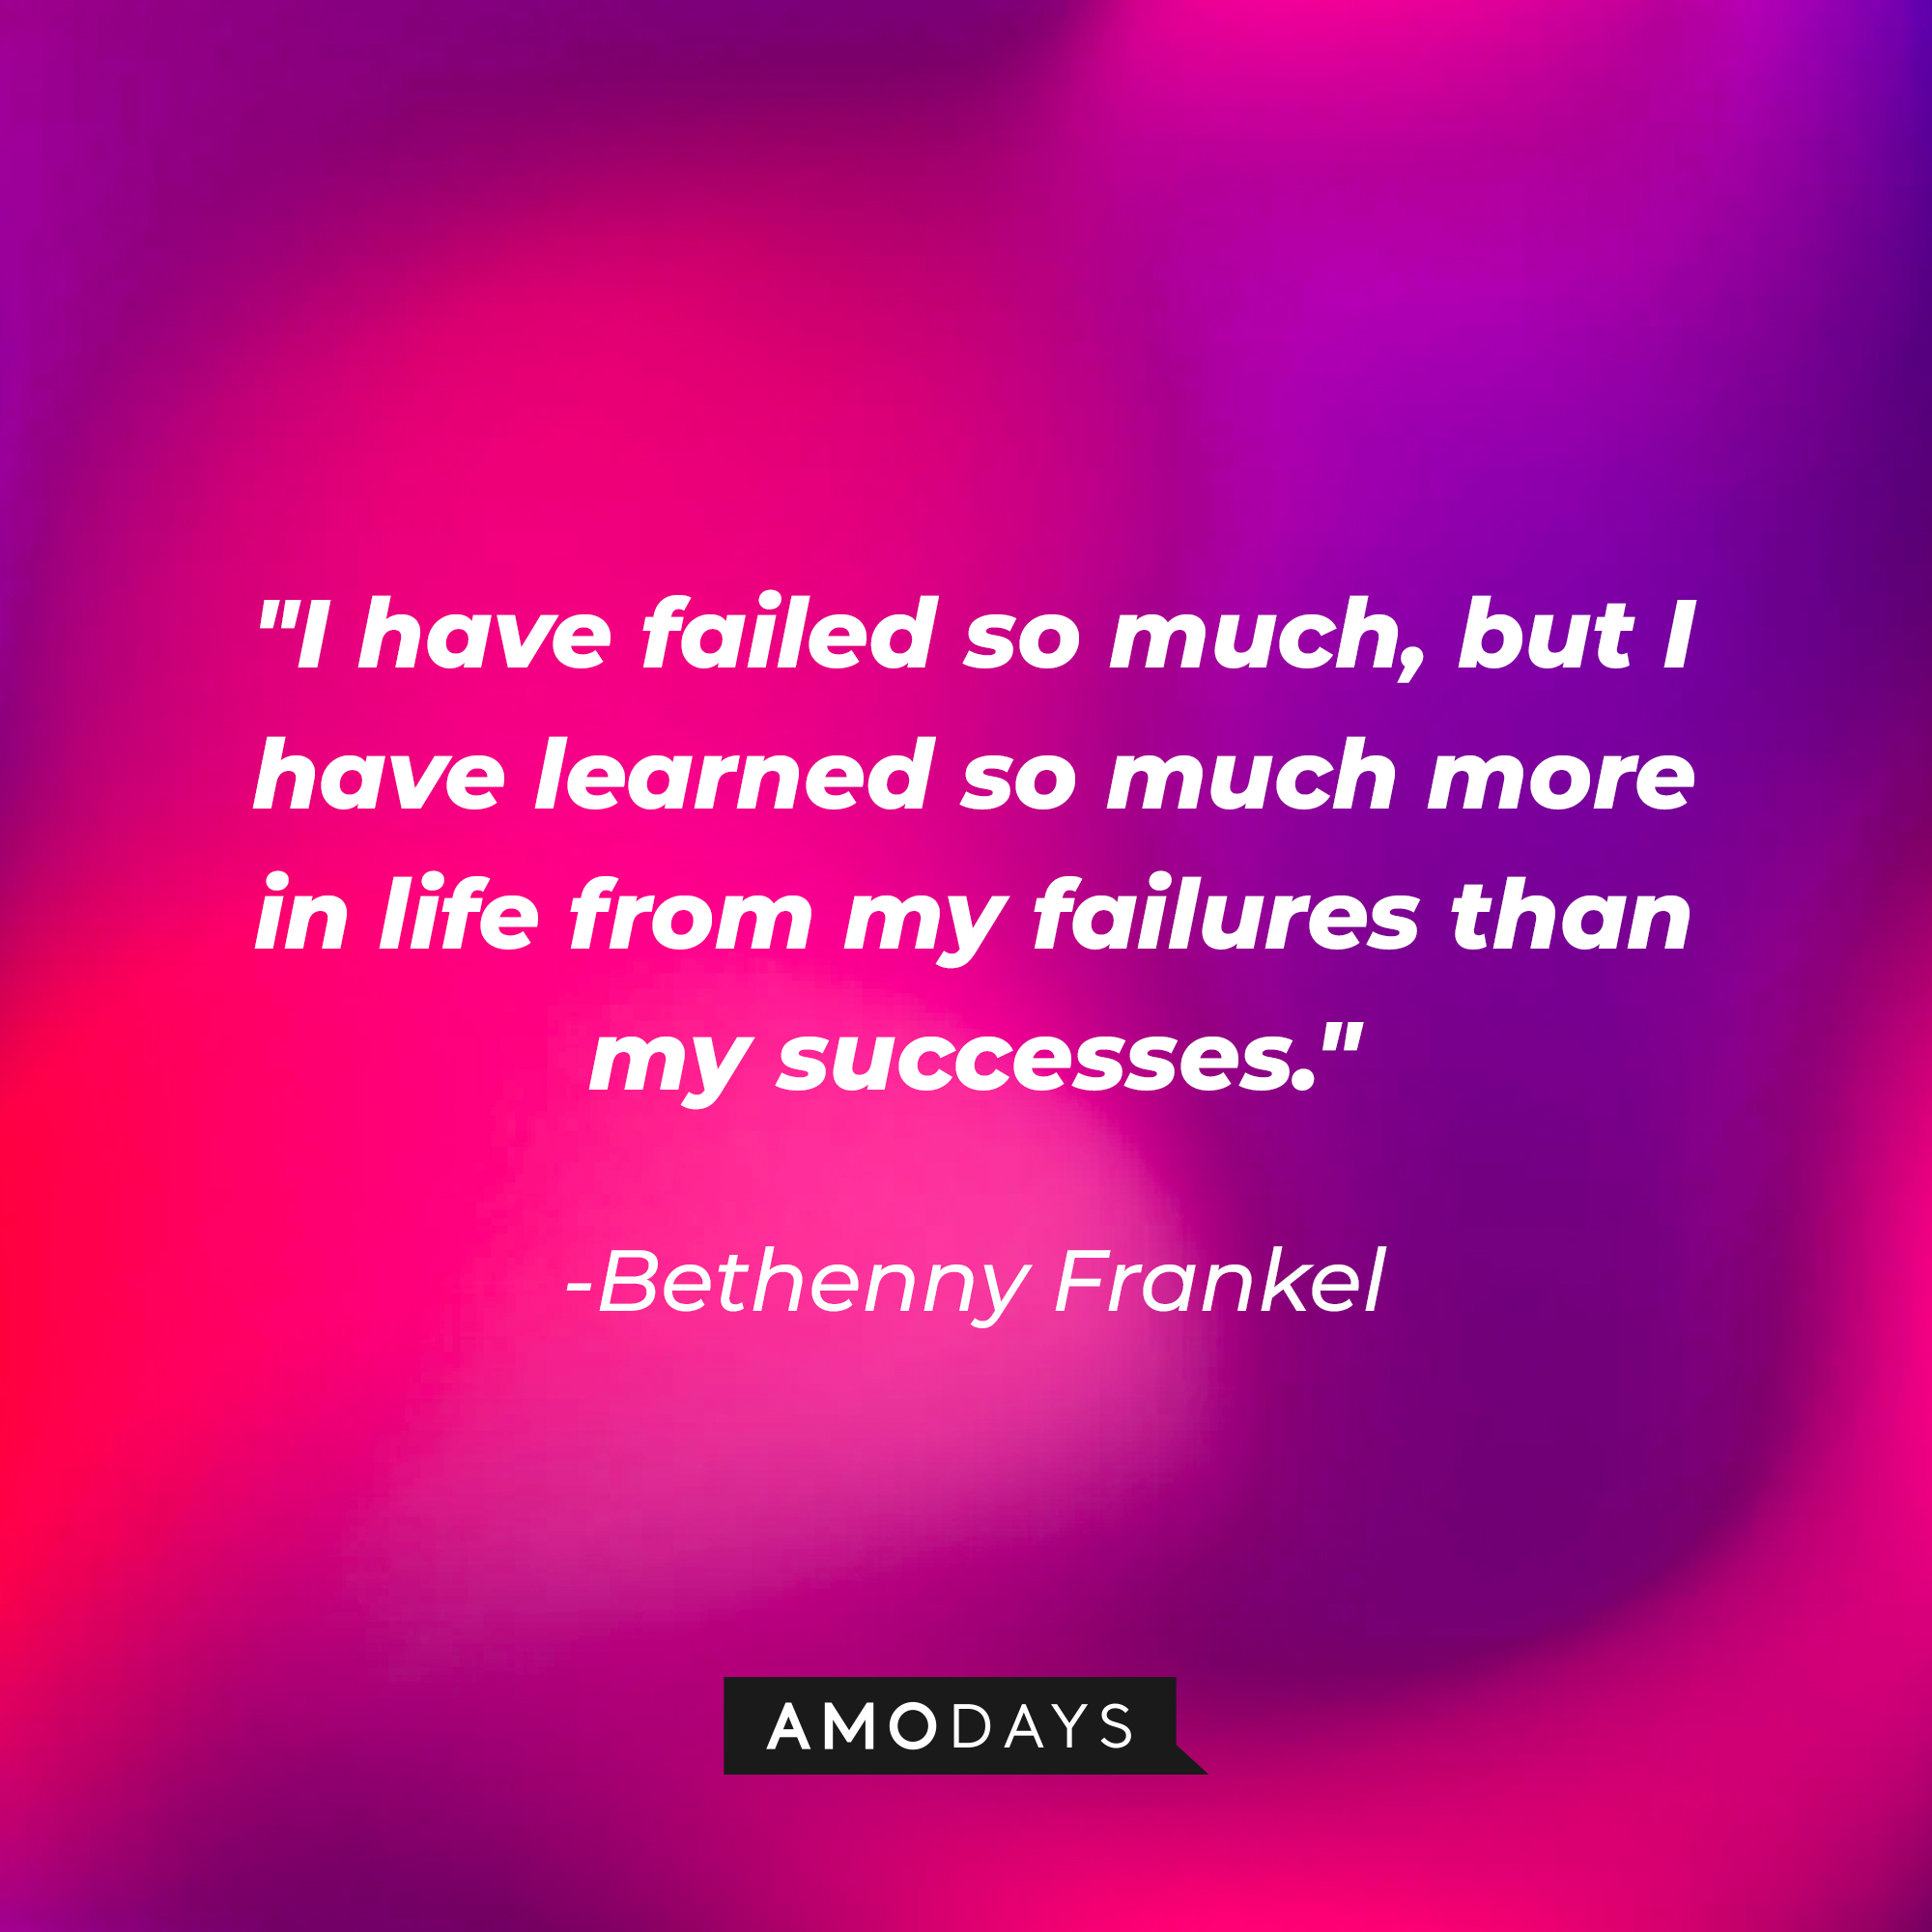 Bethenny Frankel's quote: "I have failed so much, but I have learned so much more in life from my failures than my successes." | Source: Amodays